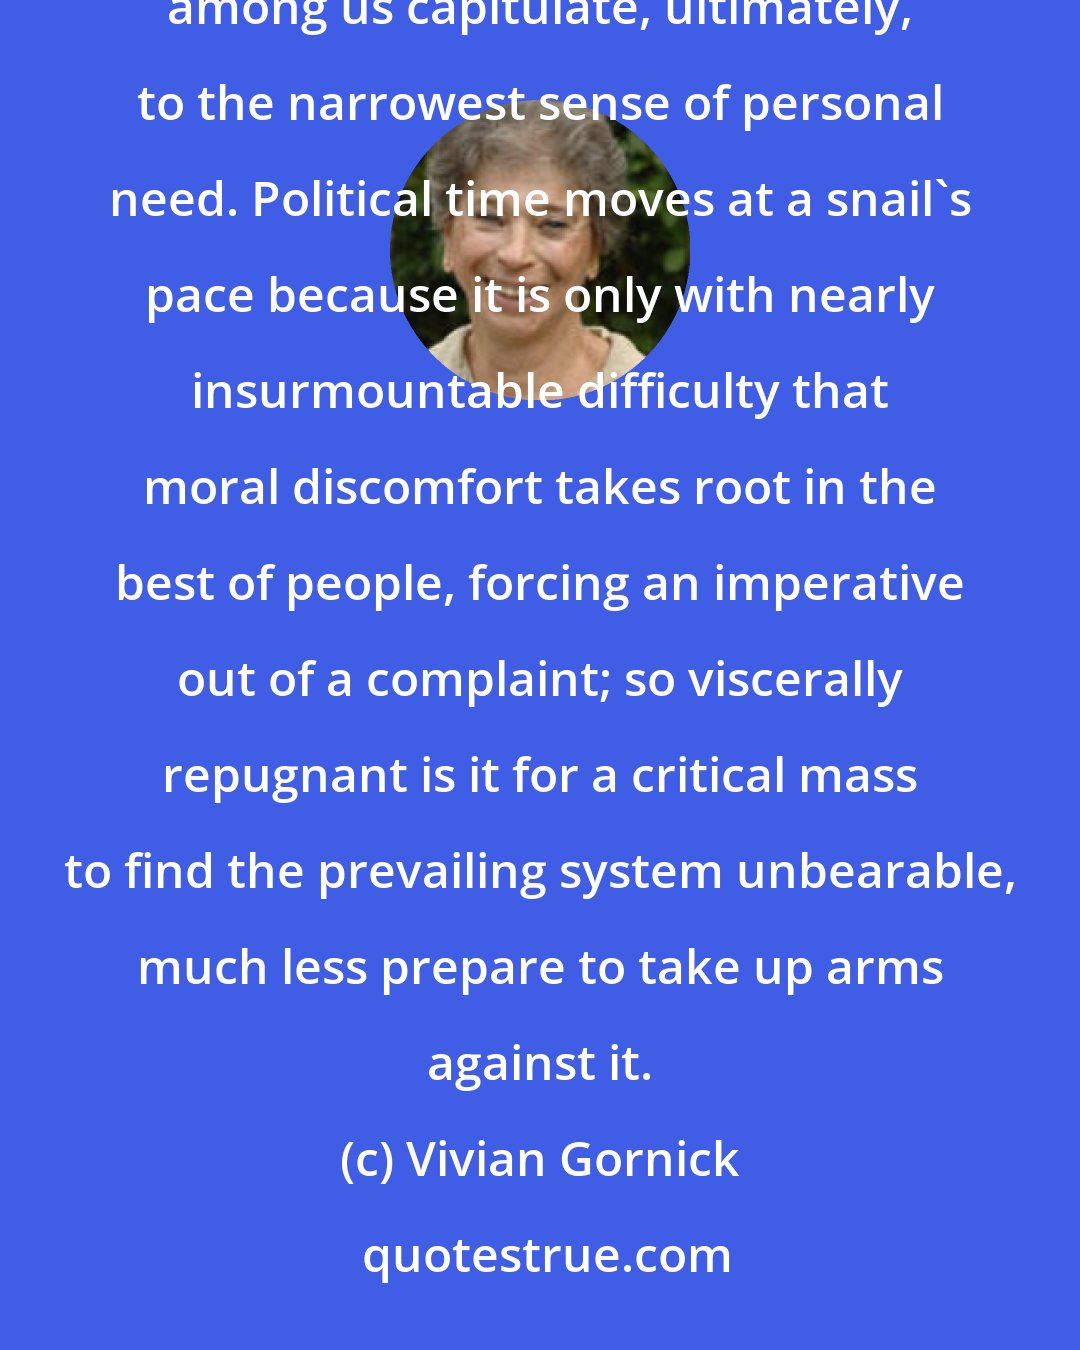 Vivian Gornick: How dominating is appetite, how enveloping immediate experience! Even the philosophically minded among us capitulate, ultimately, to the narrowest sense of personal need. Political time moves at a snail's pace because it is only with nearly insurmountable difficulty that moral discomfort takes root in the best of people, forcing an imperative out of a complaint; so viscerally repugnant is it for a critical mass to find the prevailing system unbearable, much less prepare to take up arms against it.